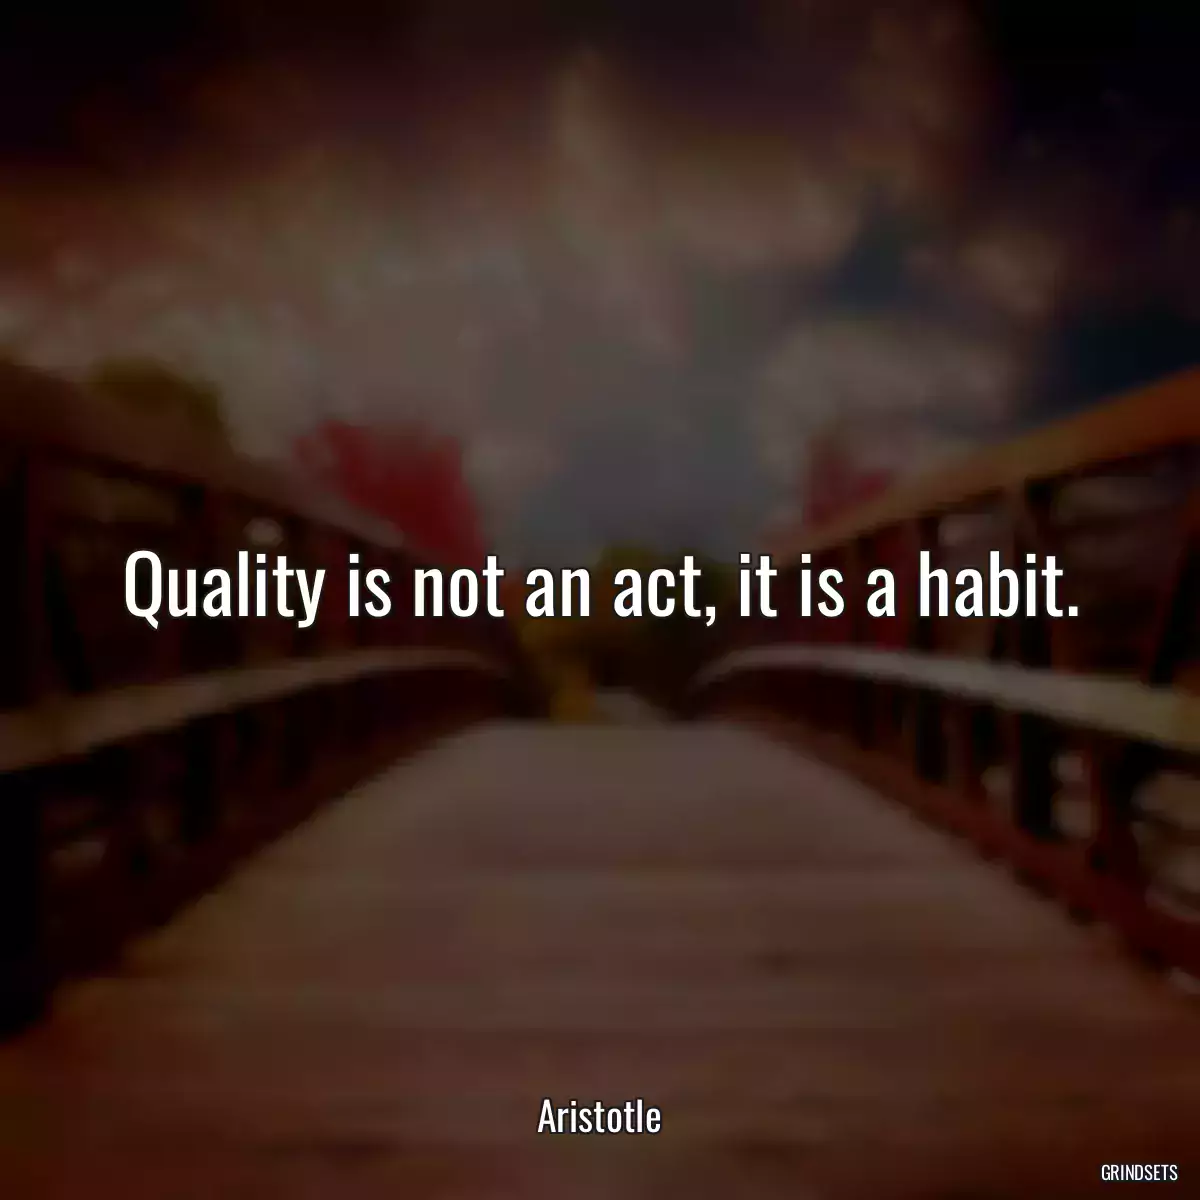 Quality is not an act, it is a habit.